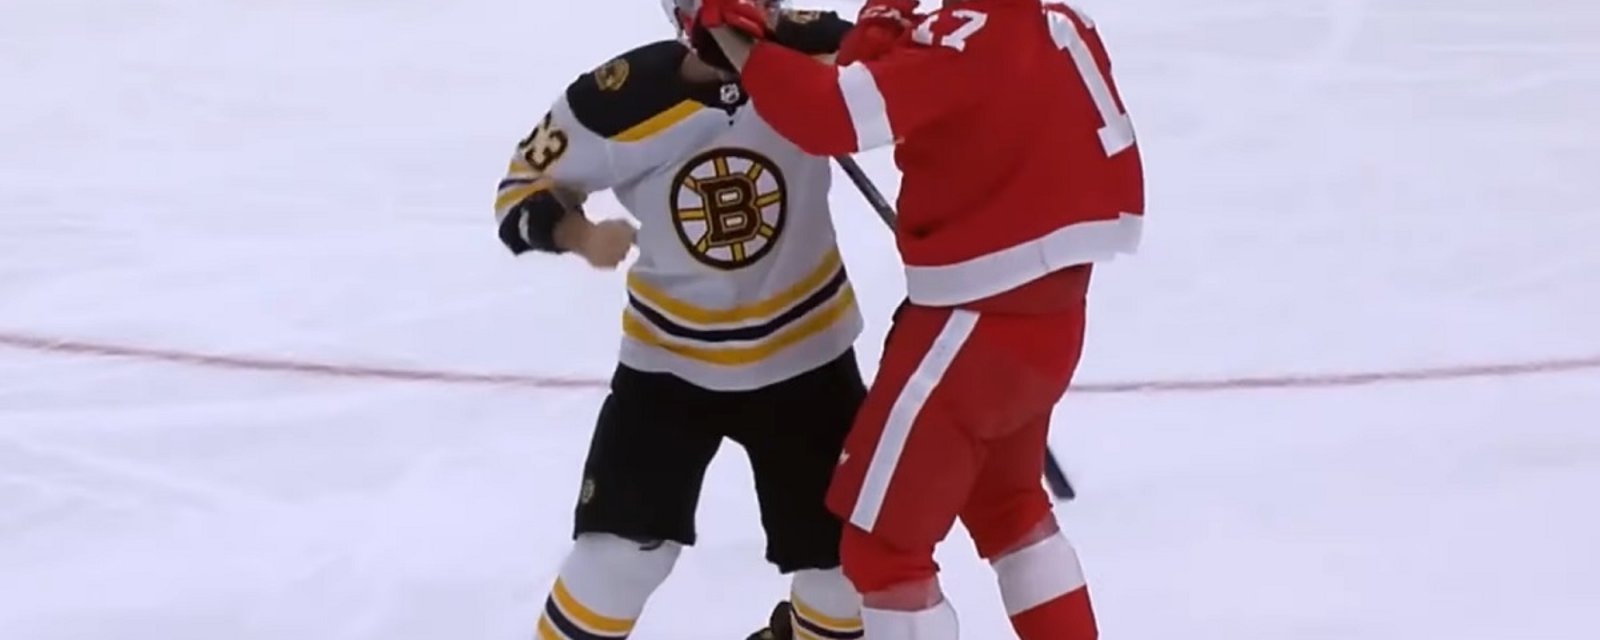 Brad Marchand has enough of Filip Hronek and drops the gloves!